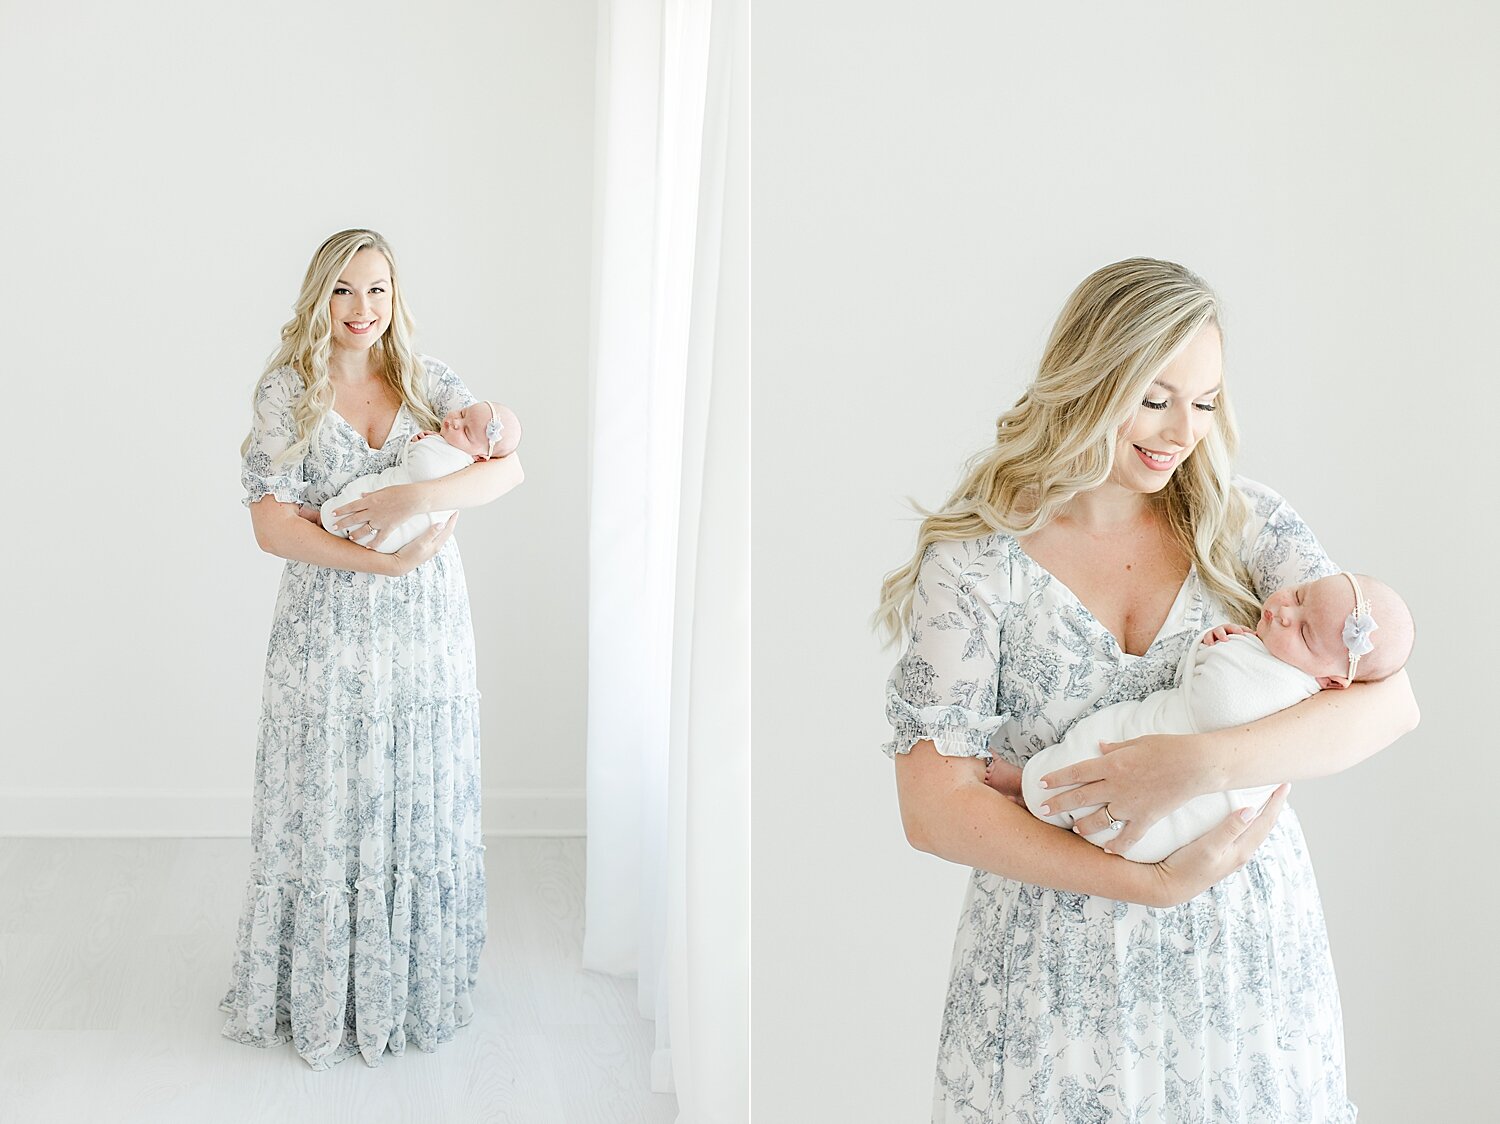 Mom holding her baby girl during newborn session in studio in Fairfield County, CT. Photos by Kristin Wood Photography.